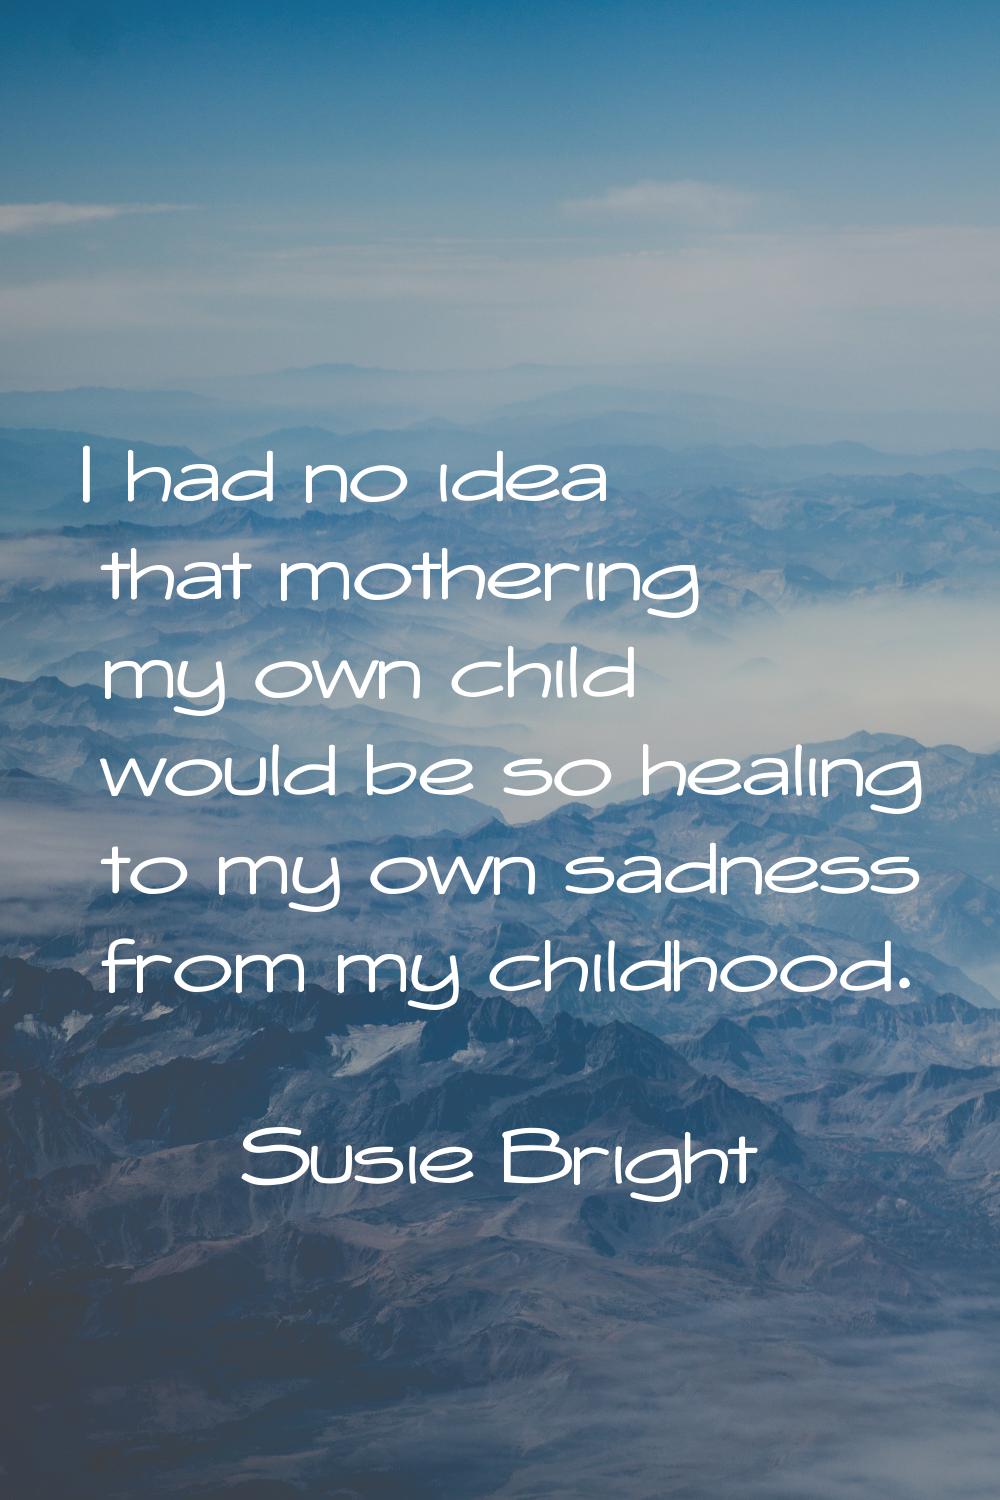 I had no idea that mothering my own child would be so healing to my own sadness from my childhood.